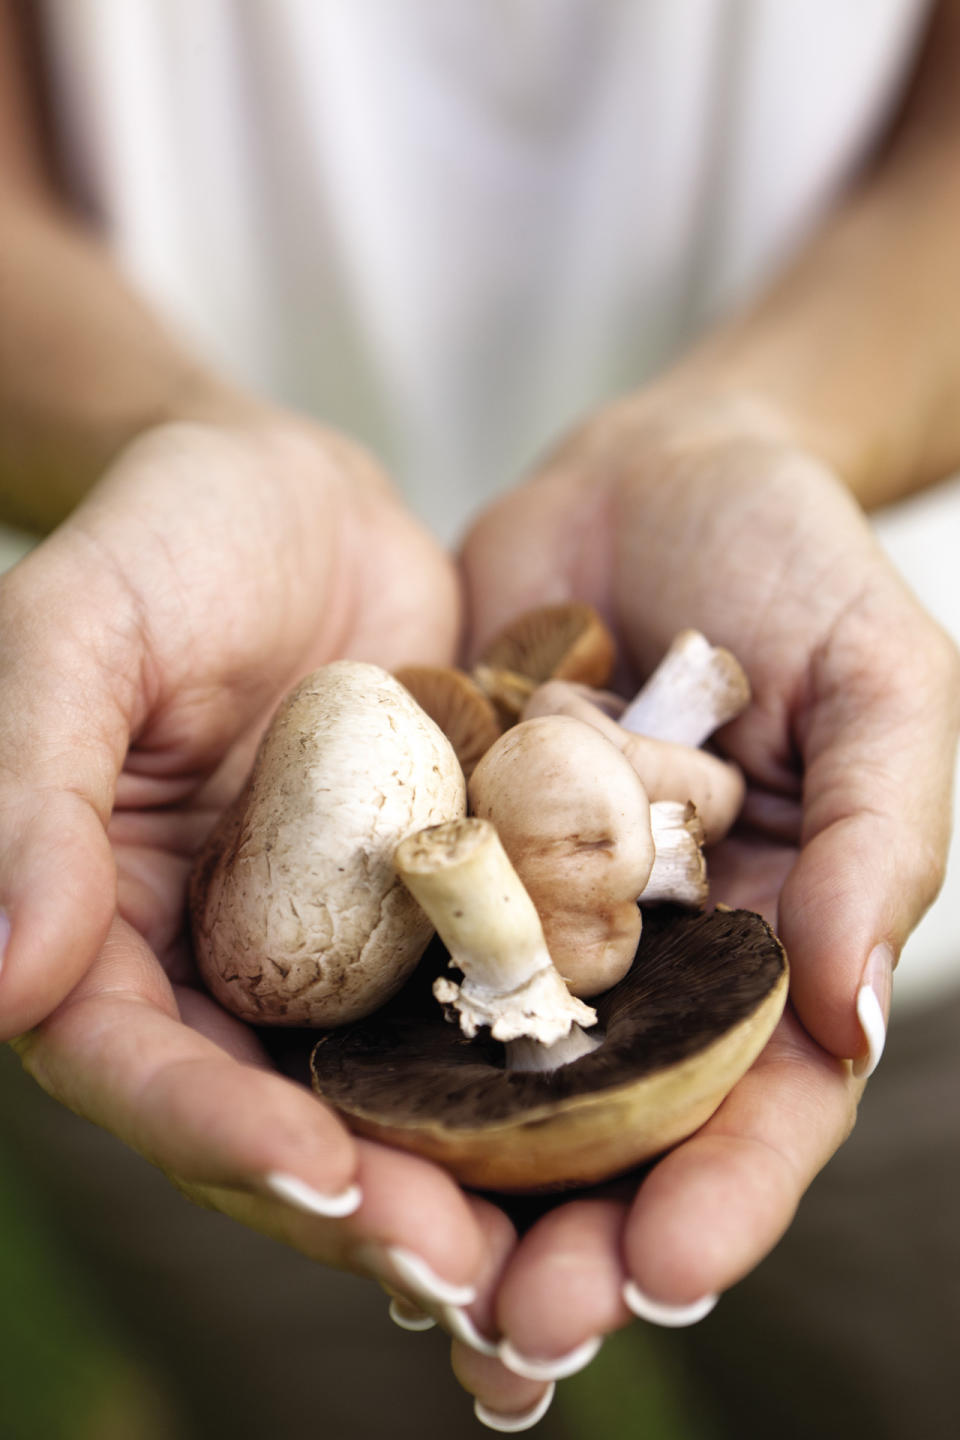 This undated image released by Four Seasons Resort Vail shows various mushrooms gathered in Vail, Colo. For $200 a person, the Four Seasons Resort Vail provides guided expeditions in luxury SUVs to look for mushrooms. The Mushrooms & Mercedes program includes a lunchtime break with wine, cheese and prosciutto, and ends with a three-course mushroom-themed meal back at the hotel. (AP Photo/Four Seasons Resort Vail, Don Riddle)